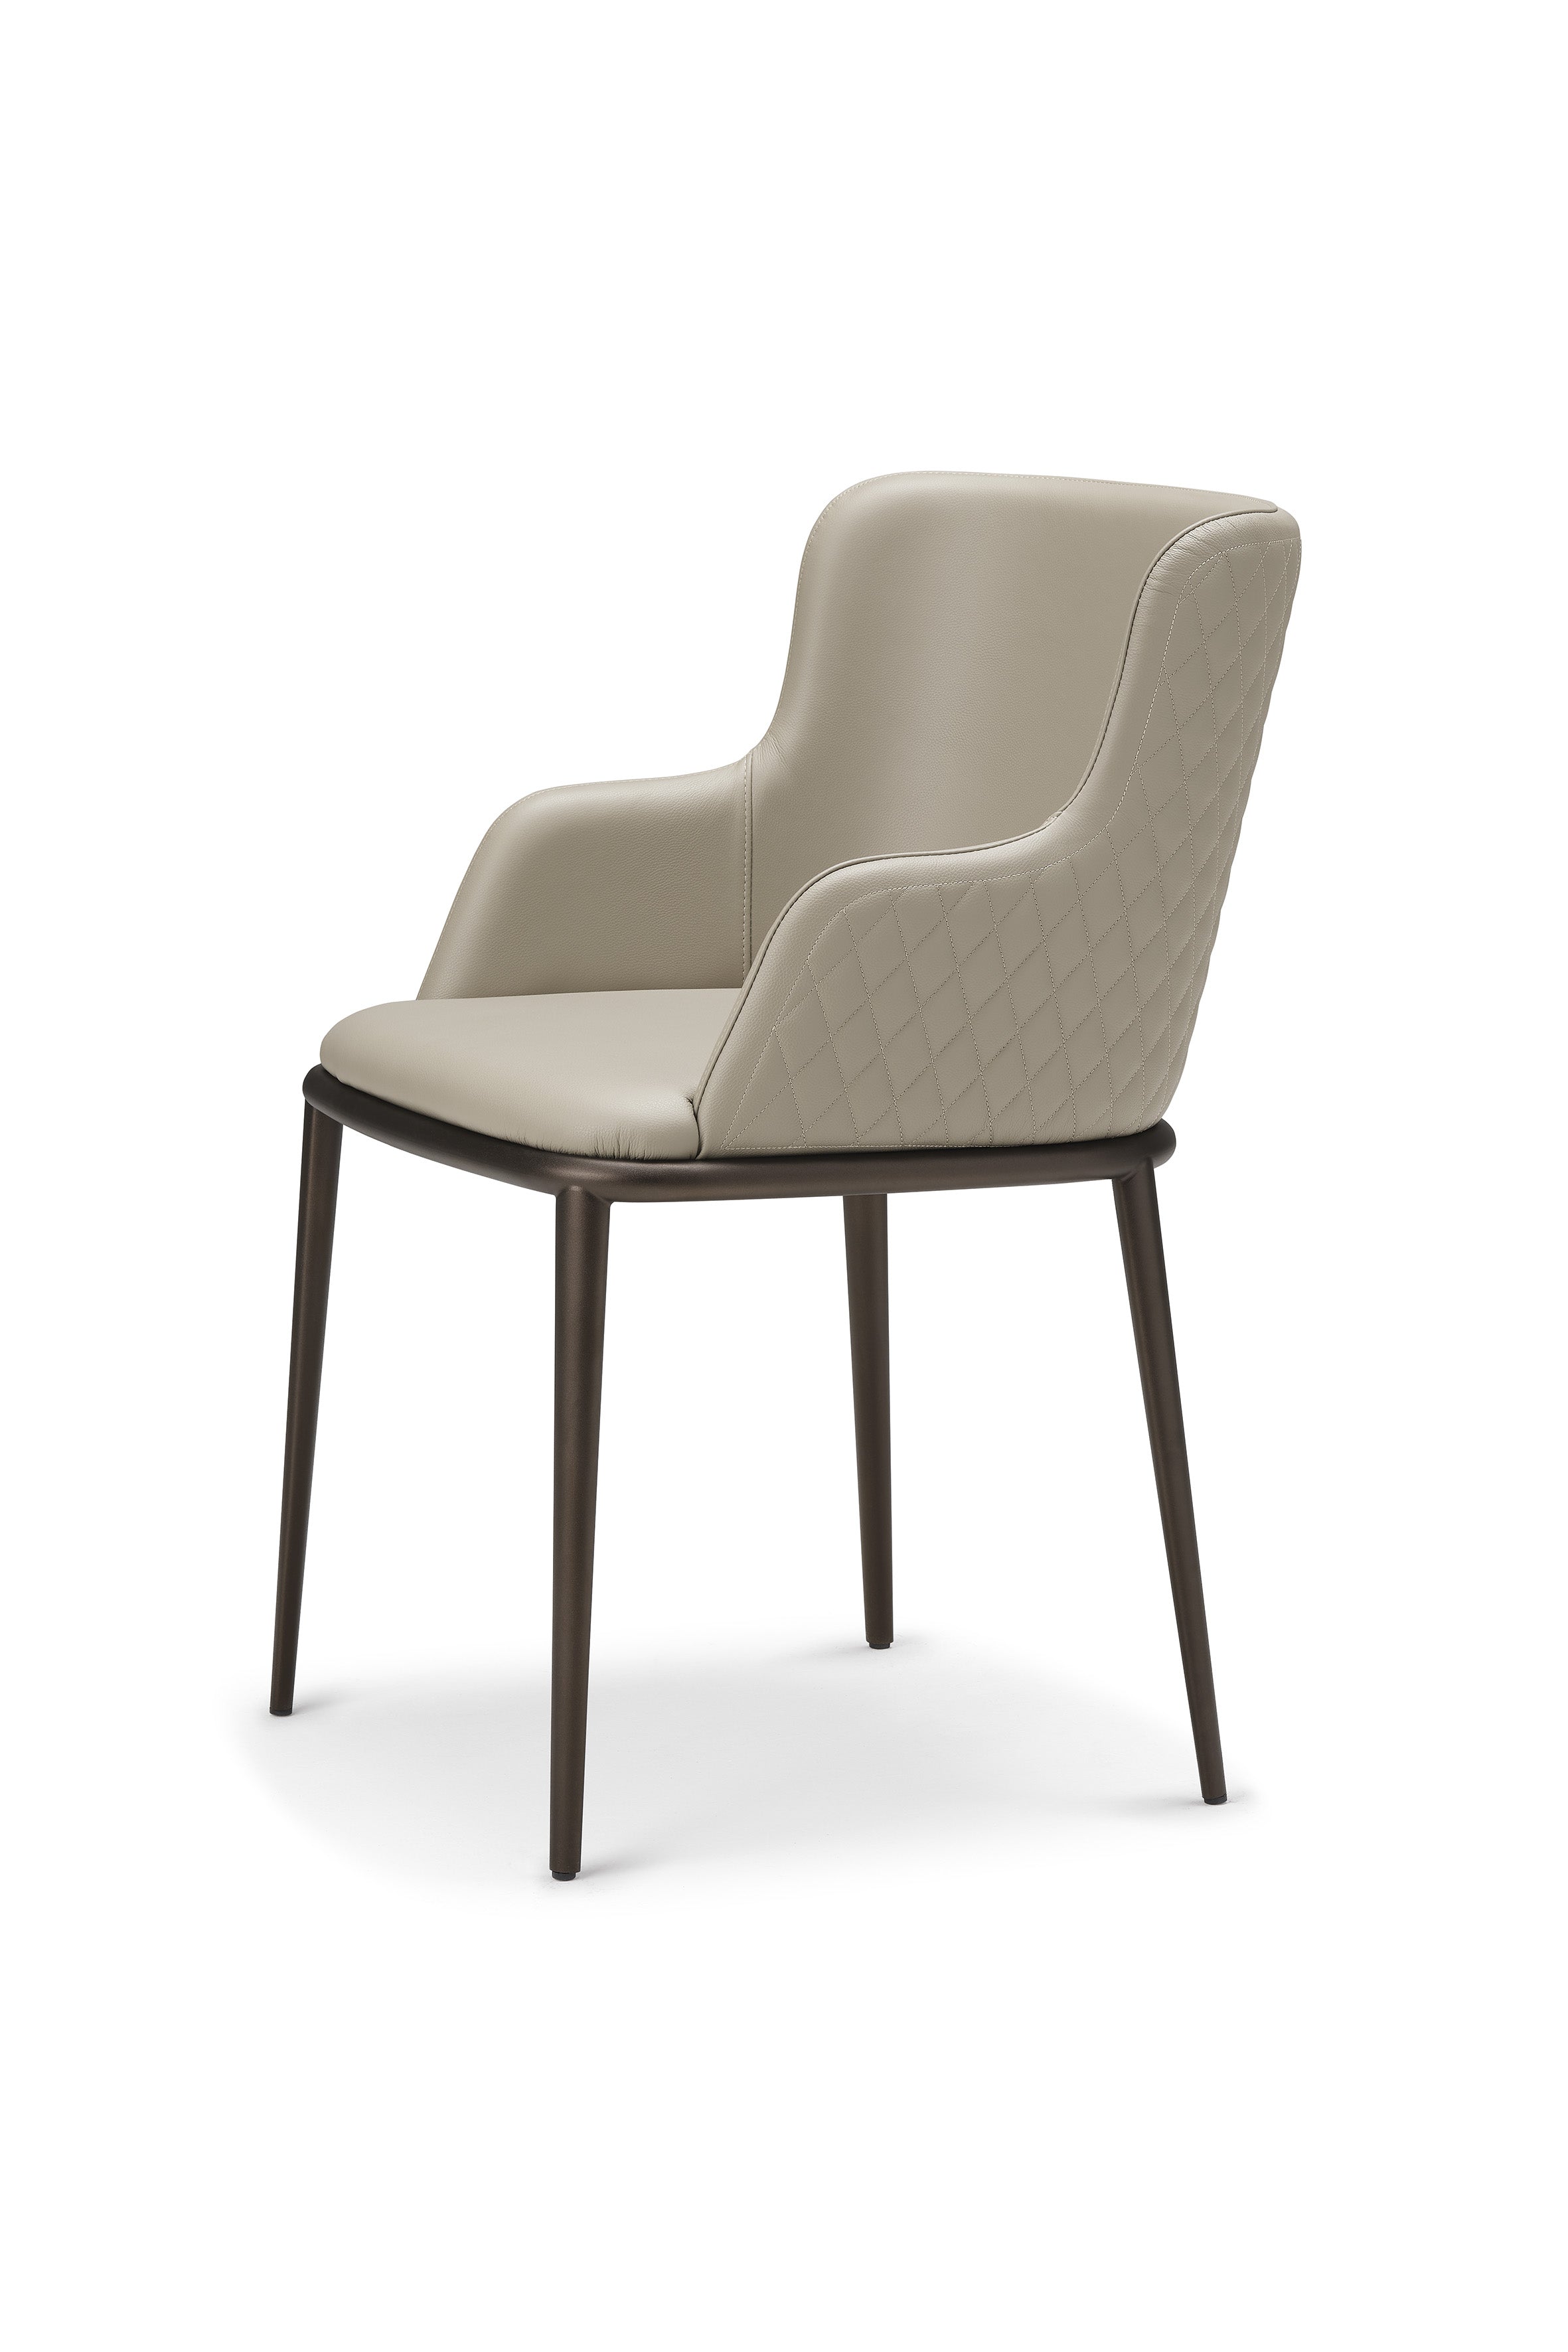 cattelan italia magda ml Chair with Steel Frame With or Without Arms